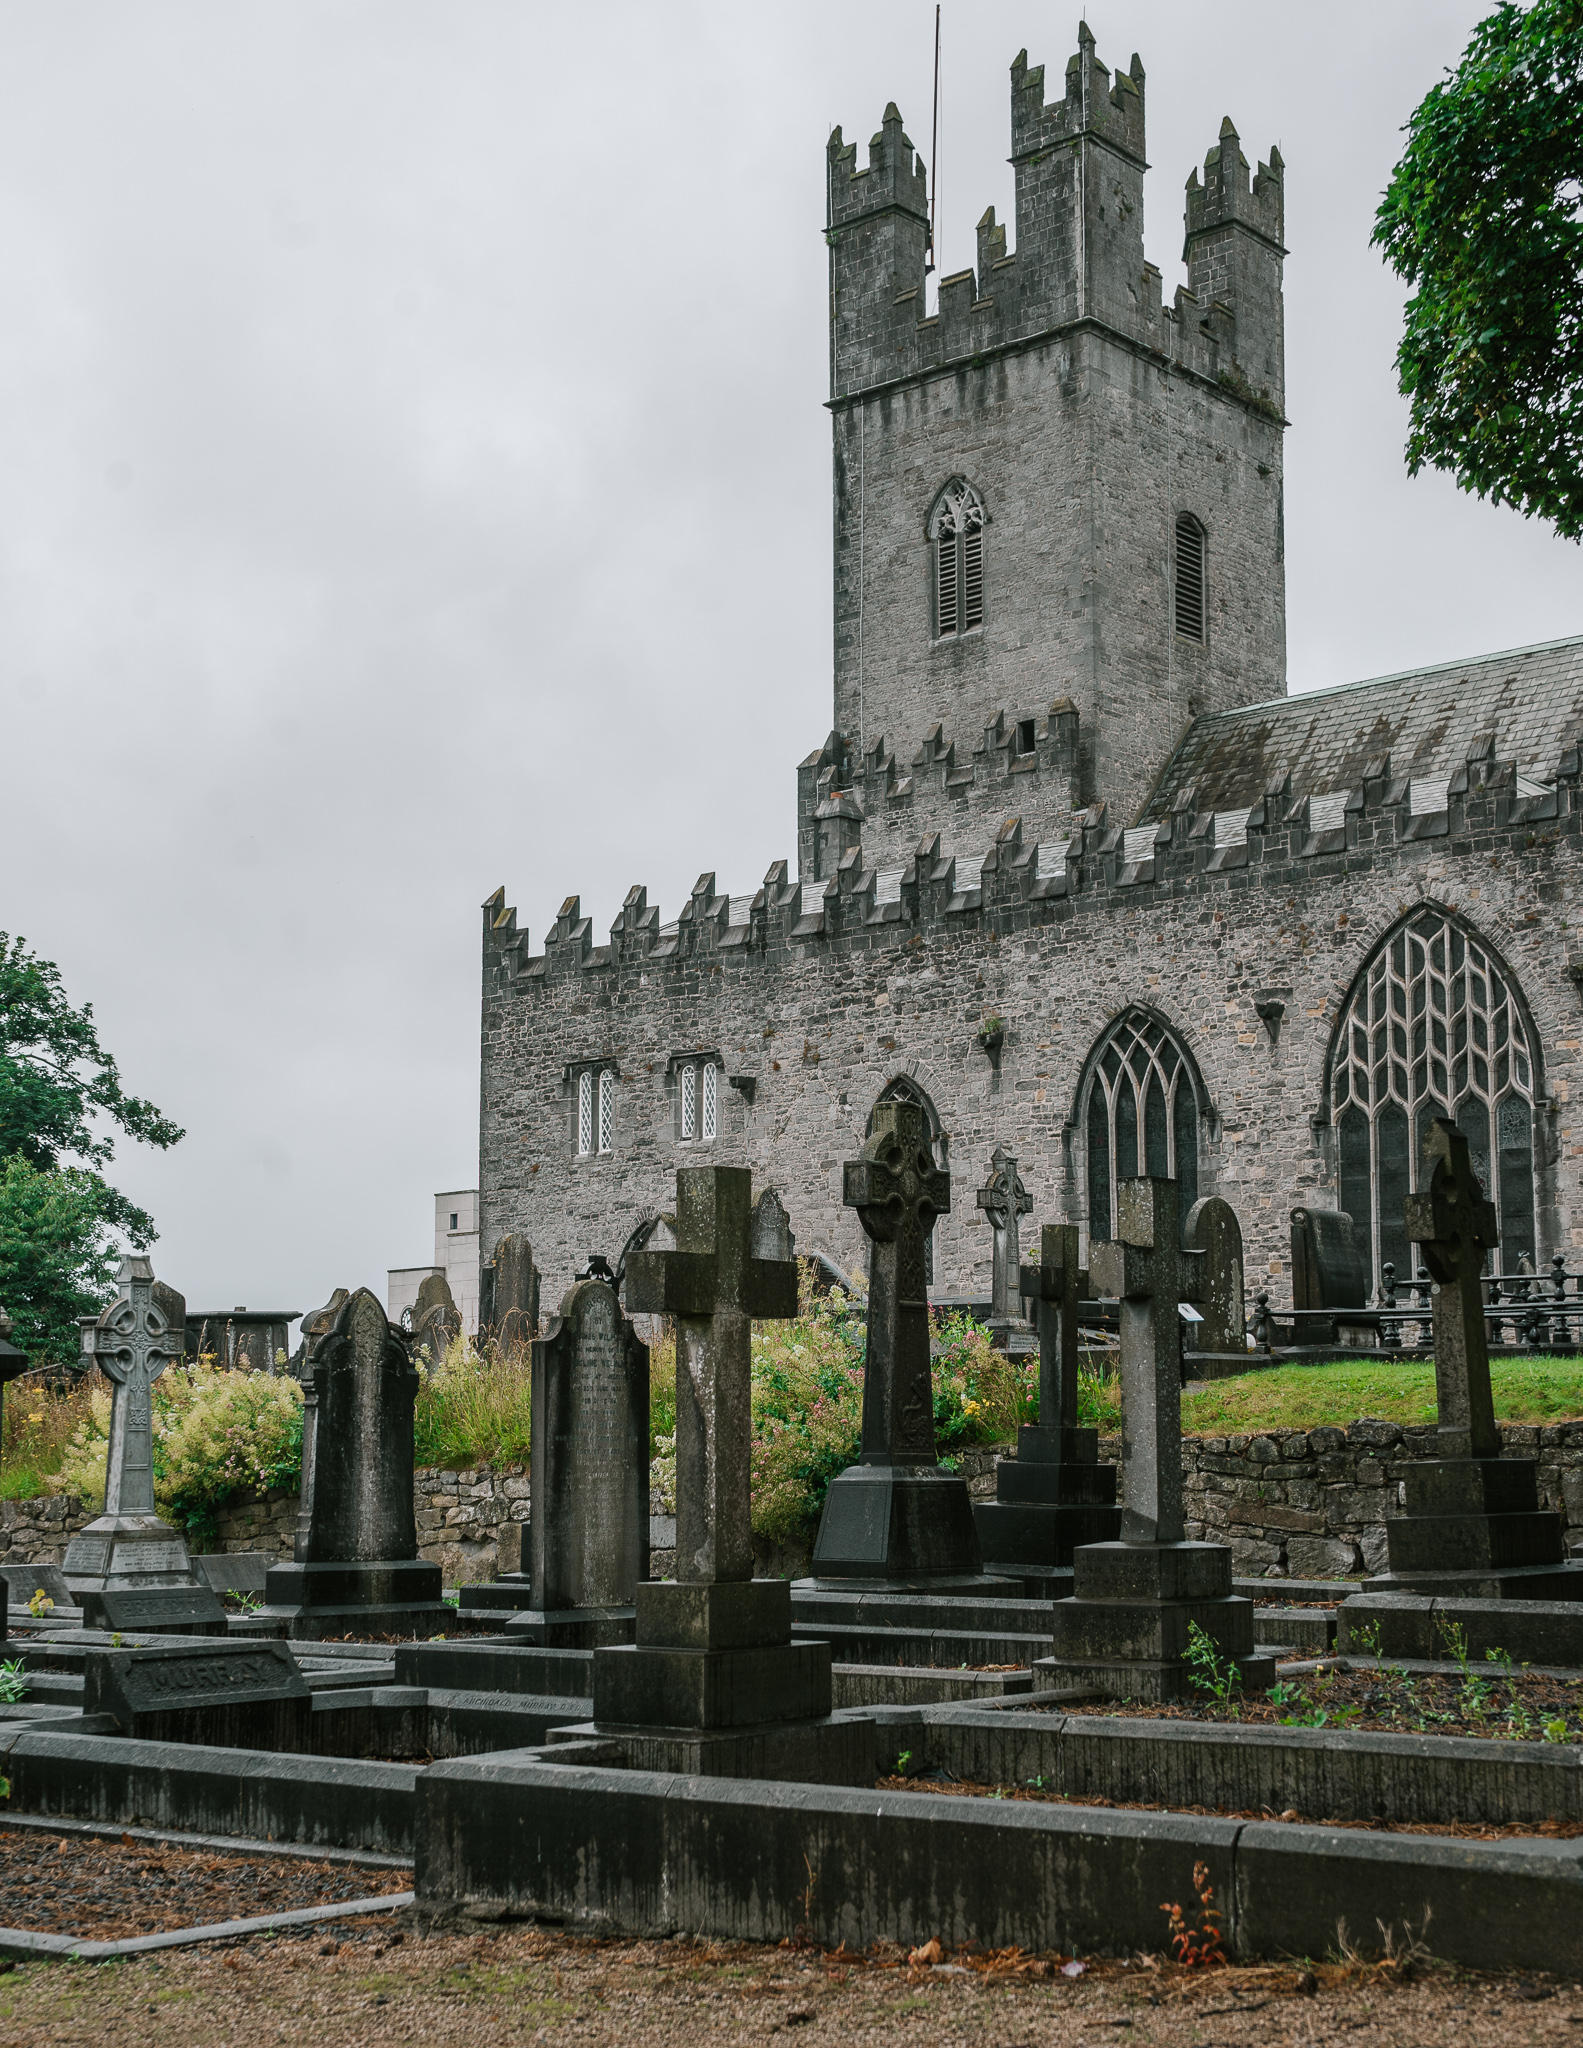 A church and cemetery in Limerick, Ireland on a rainy day